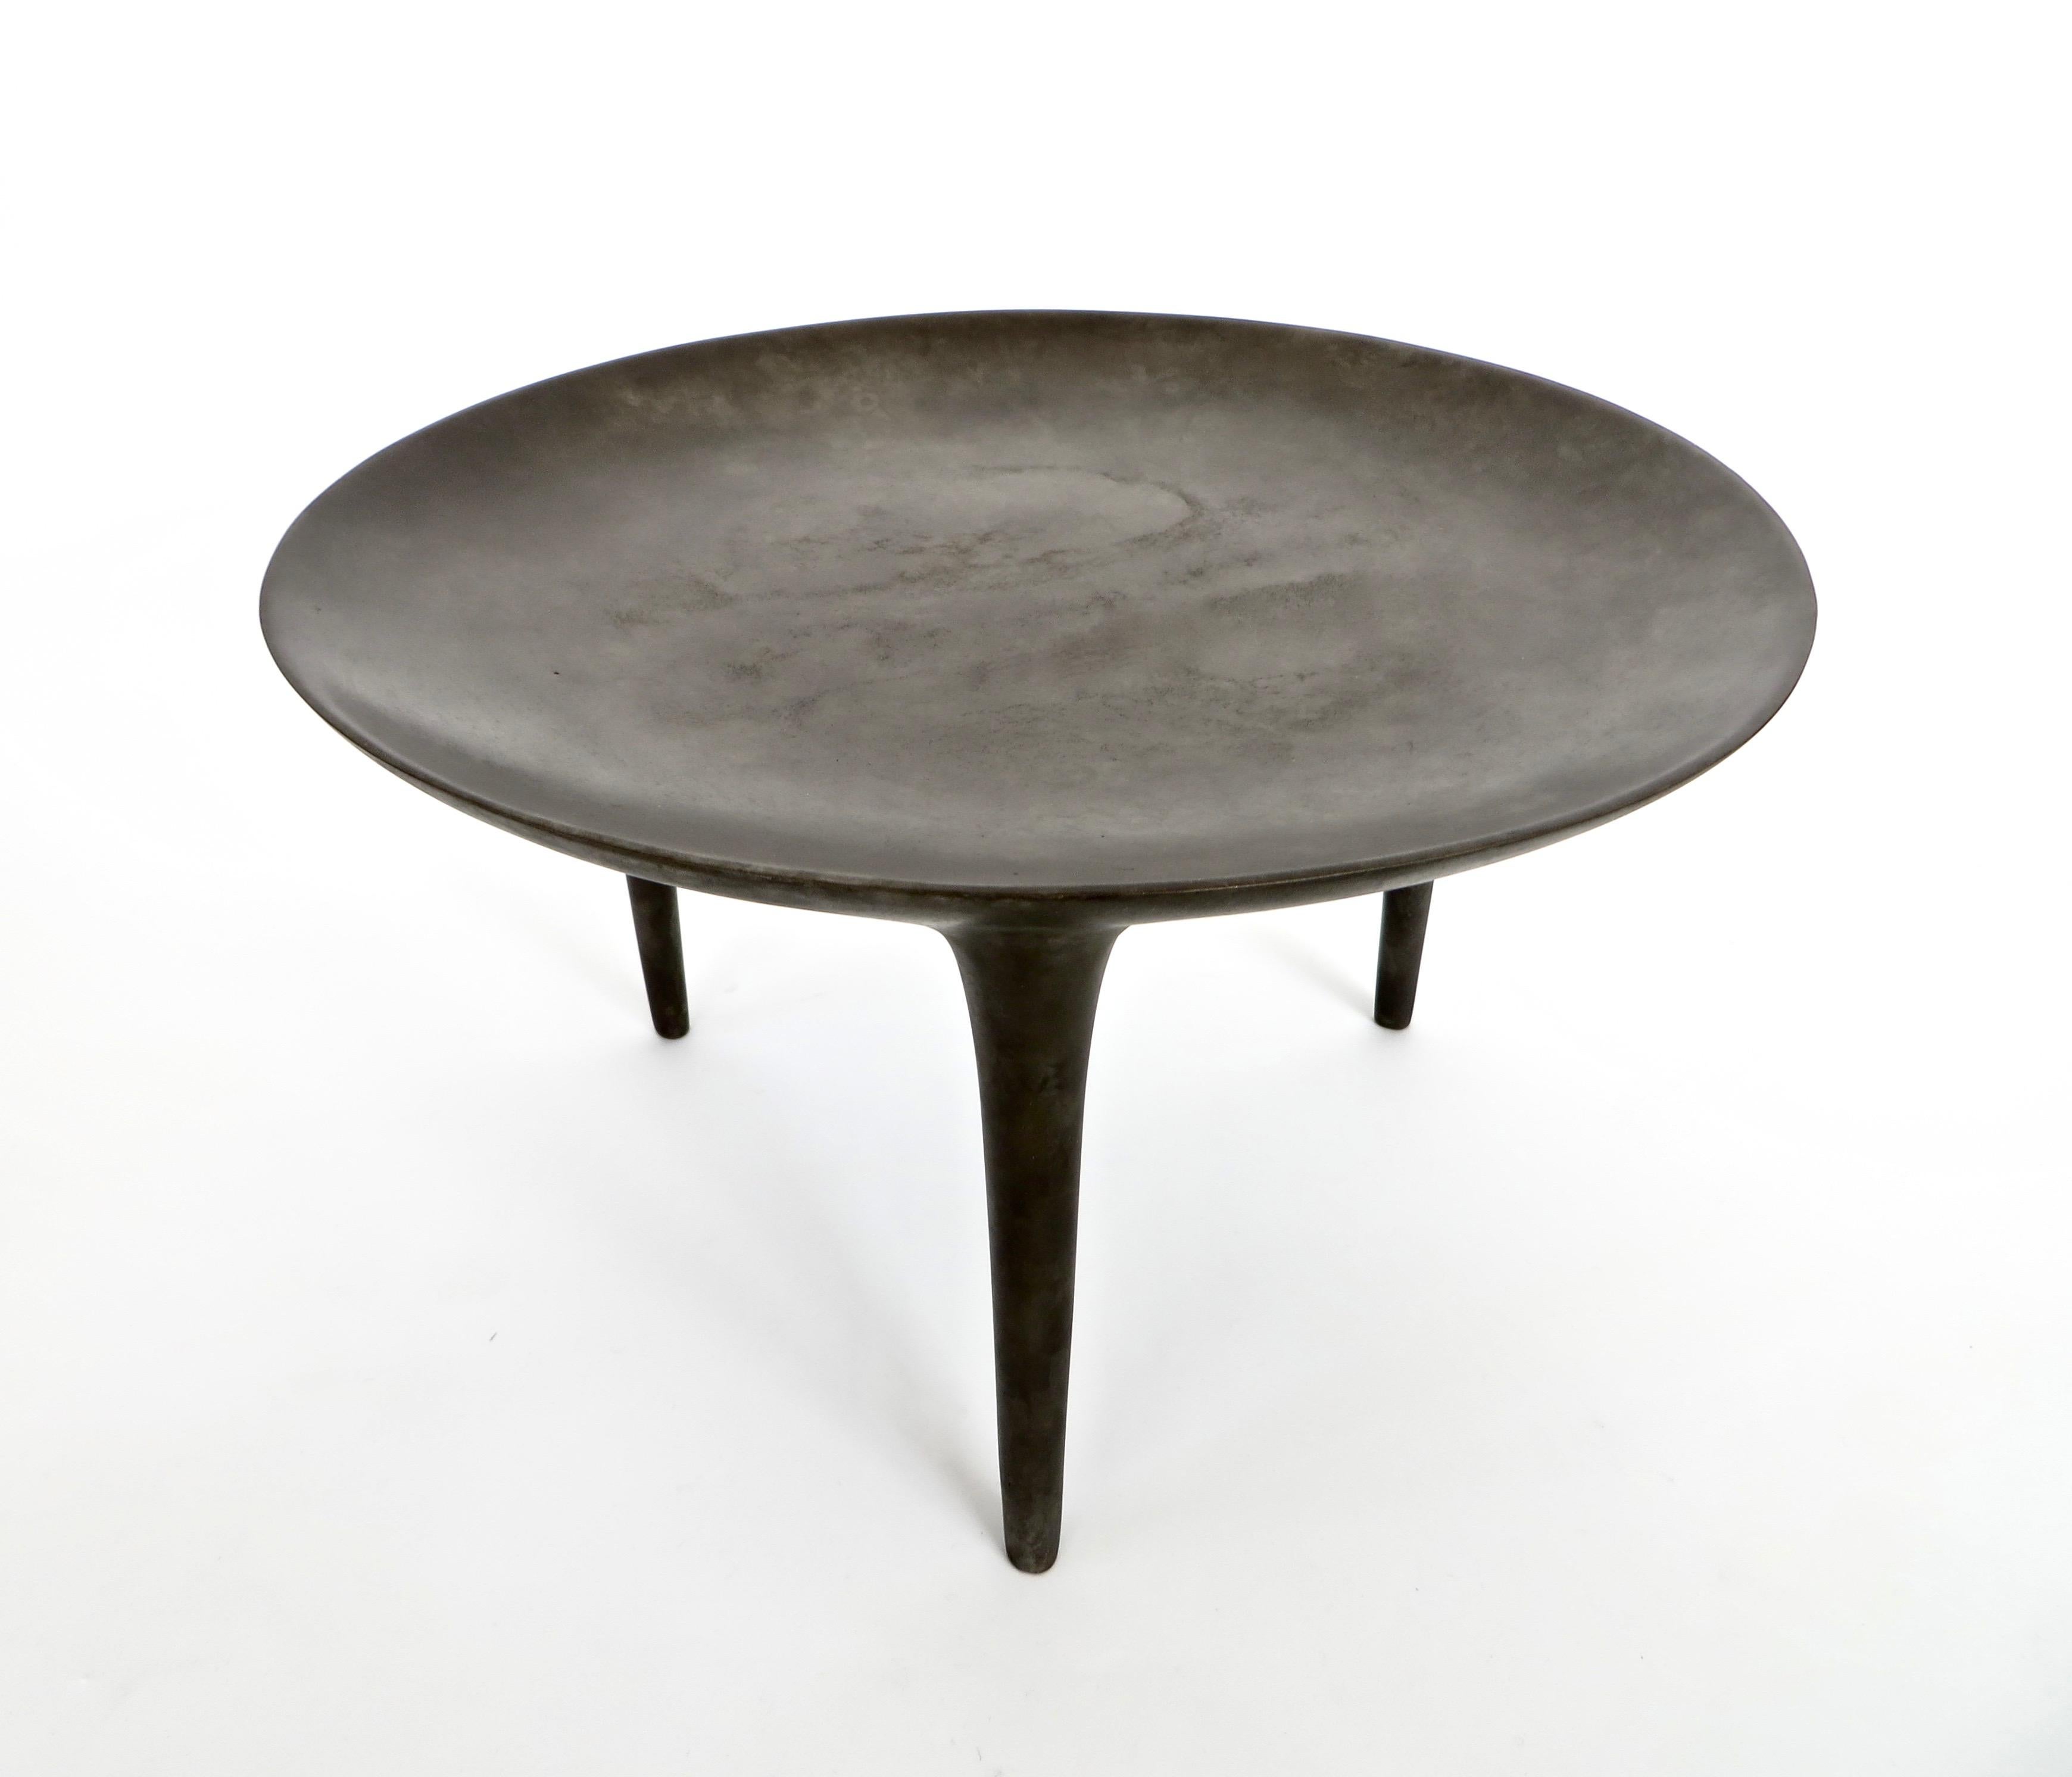 Handmade low three-legged cast bronze brazier or side table from the Rick Owens home collection. 'Low Brazier' three-legged table in solid bronze with nitrate finish. Shown is the nitrate finish. 
Signed Rick Owens. 
Also available in black finish